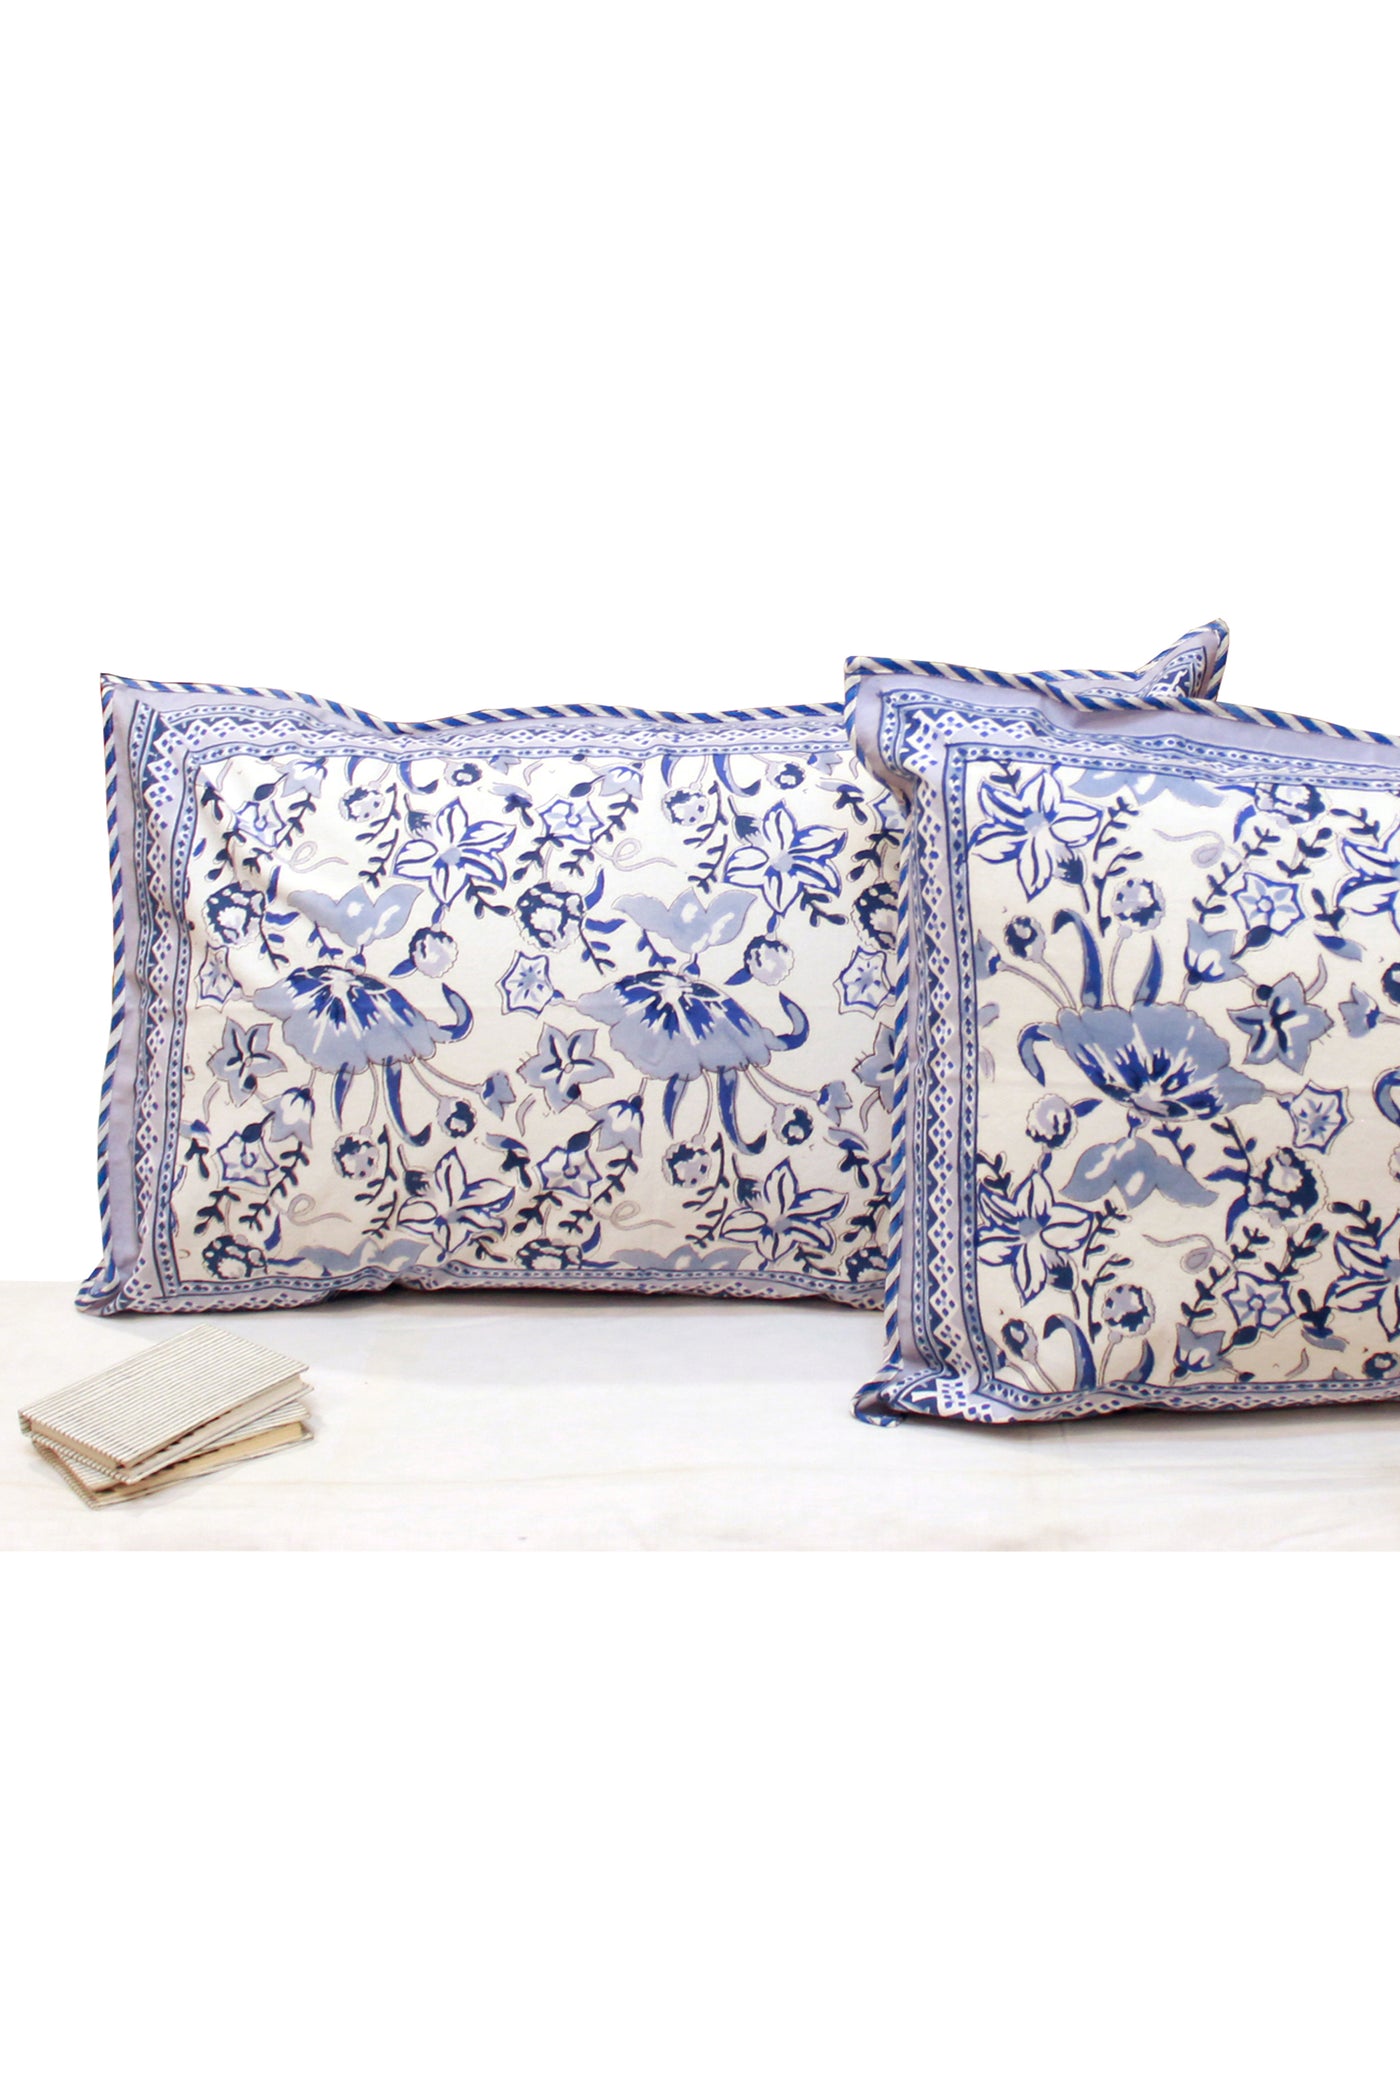 Cotton Lotus Flower Jaal Hand Block Printed Pillow Cover in Powder Blue